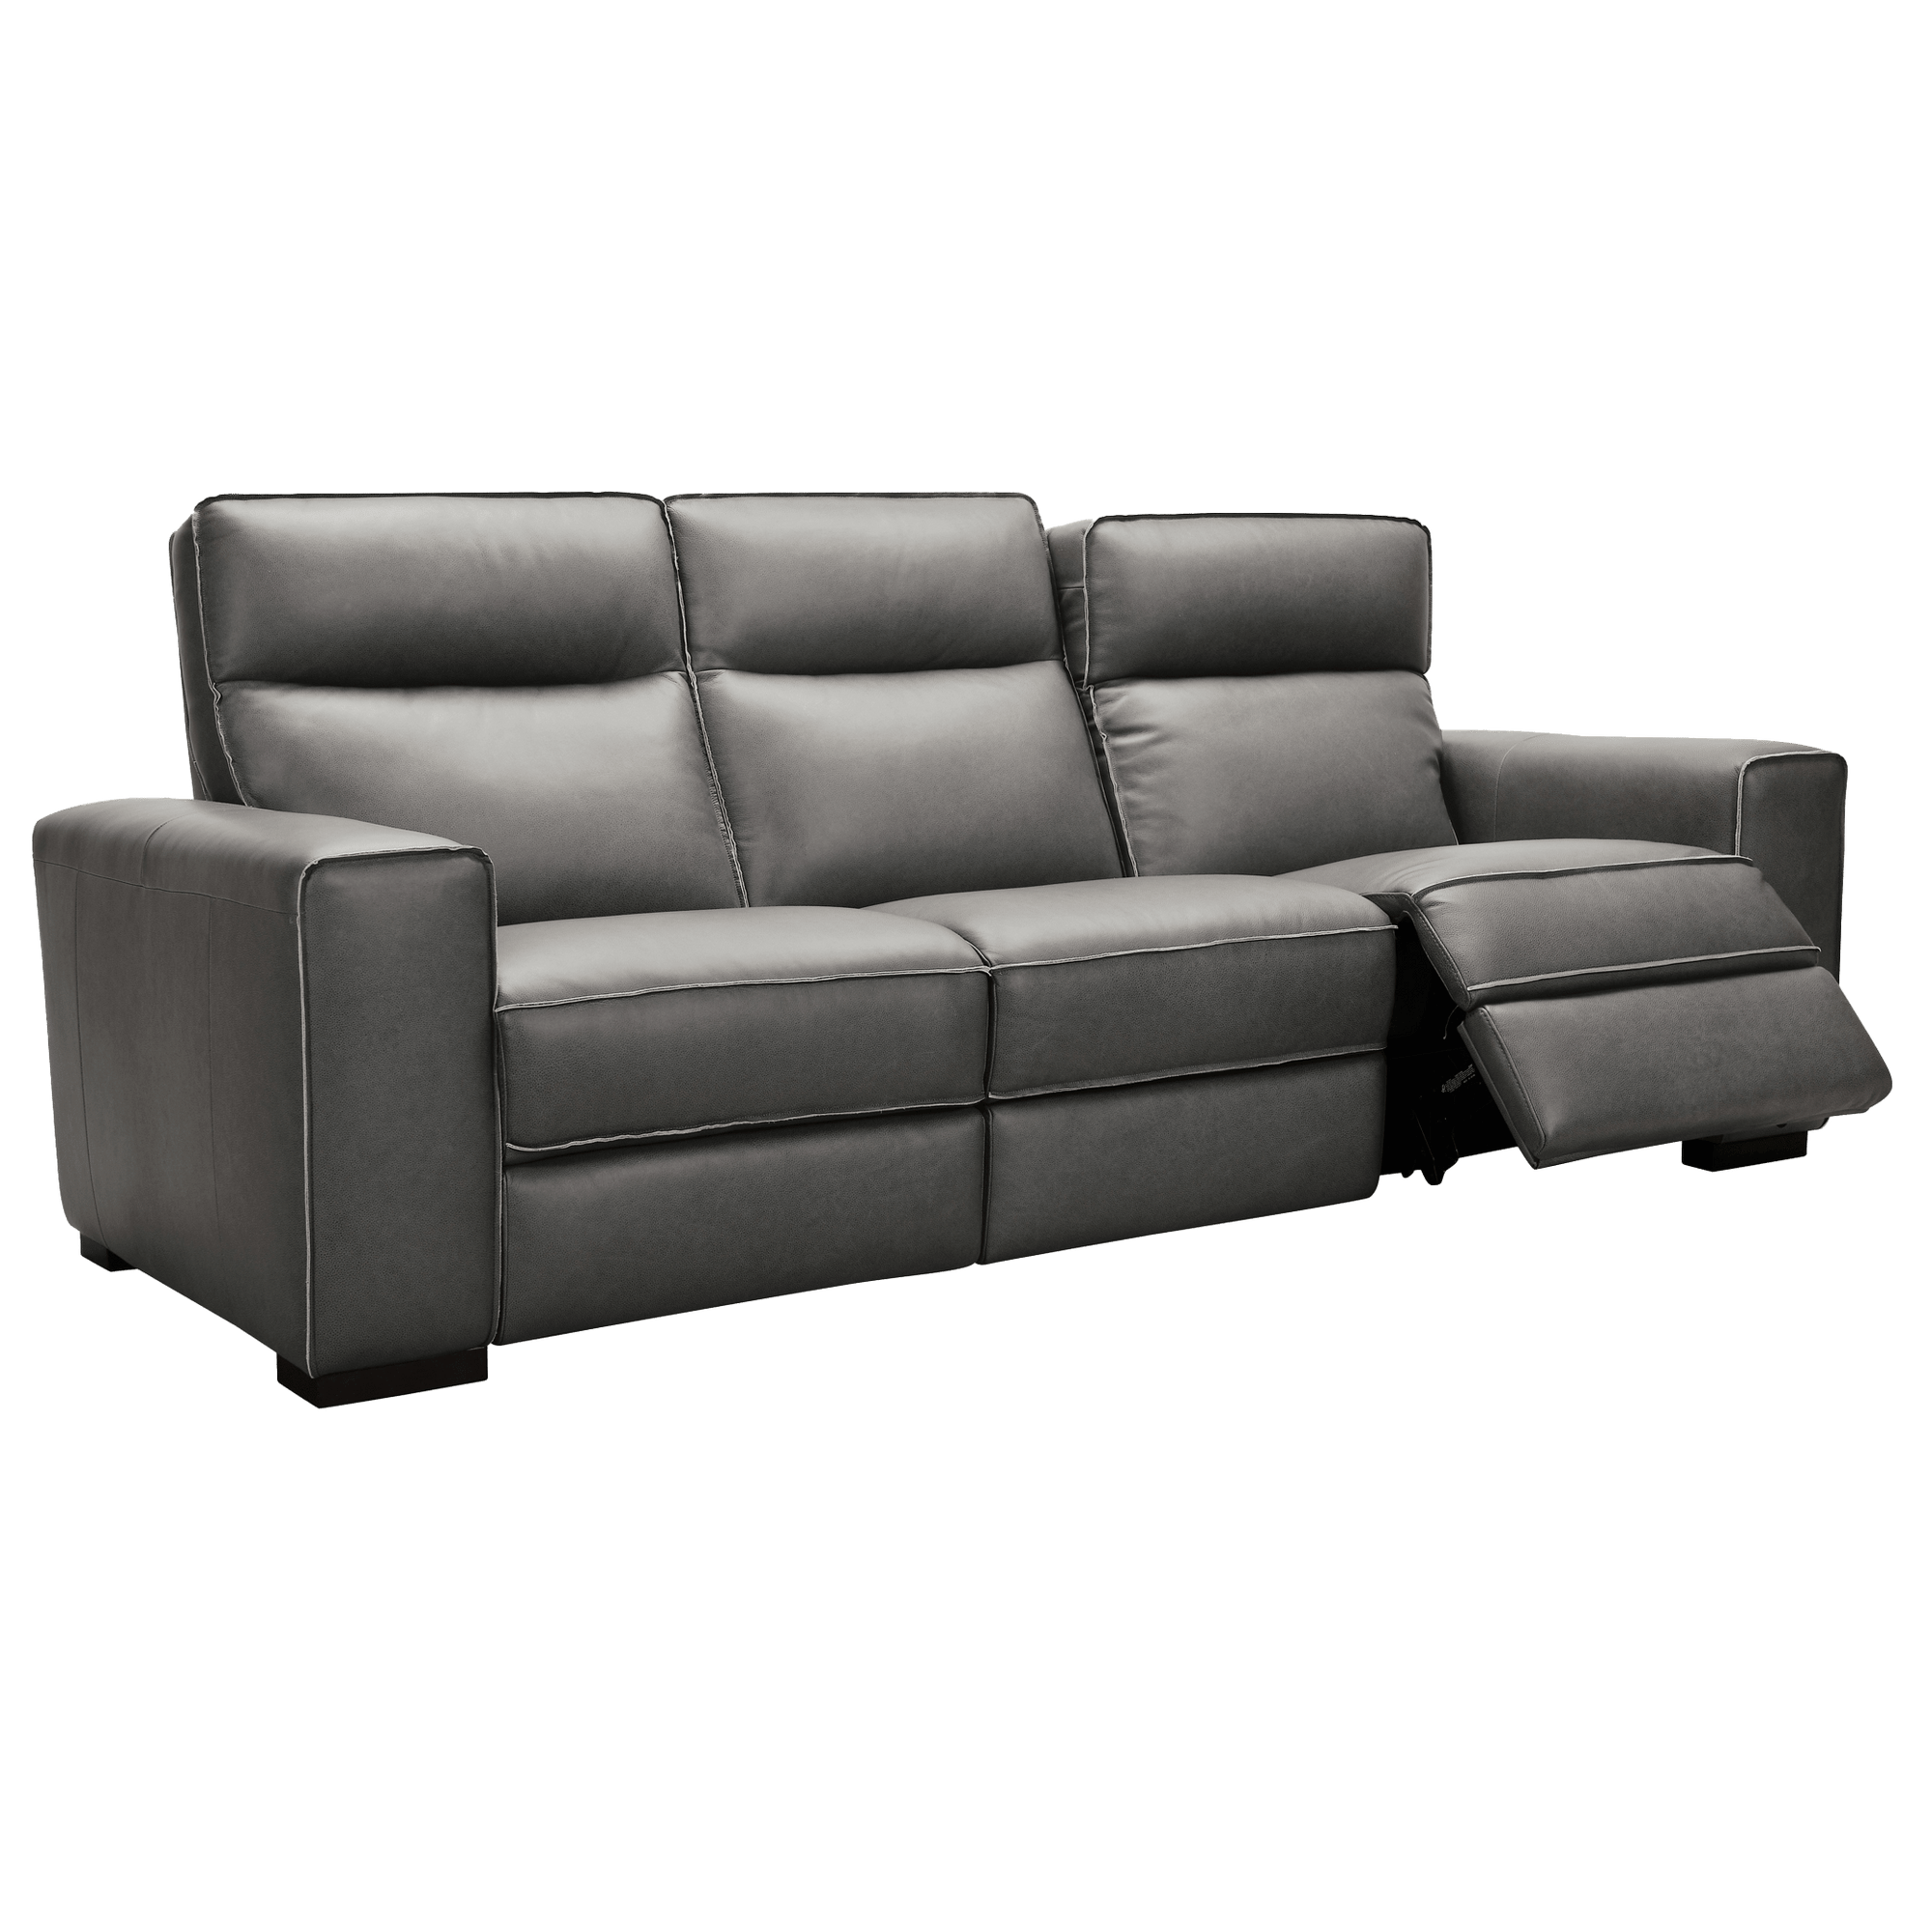 Baxlee 95" Wide Upholstered Leather Sofa, Gray - Coja